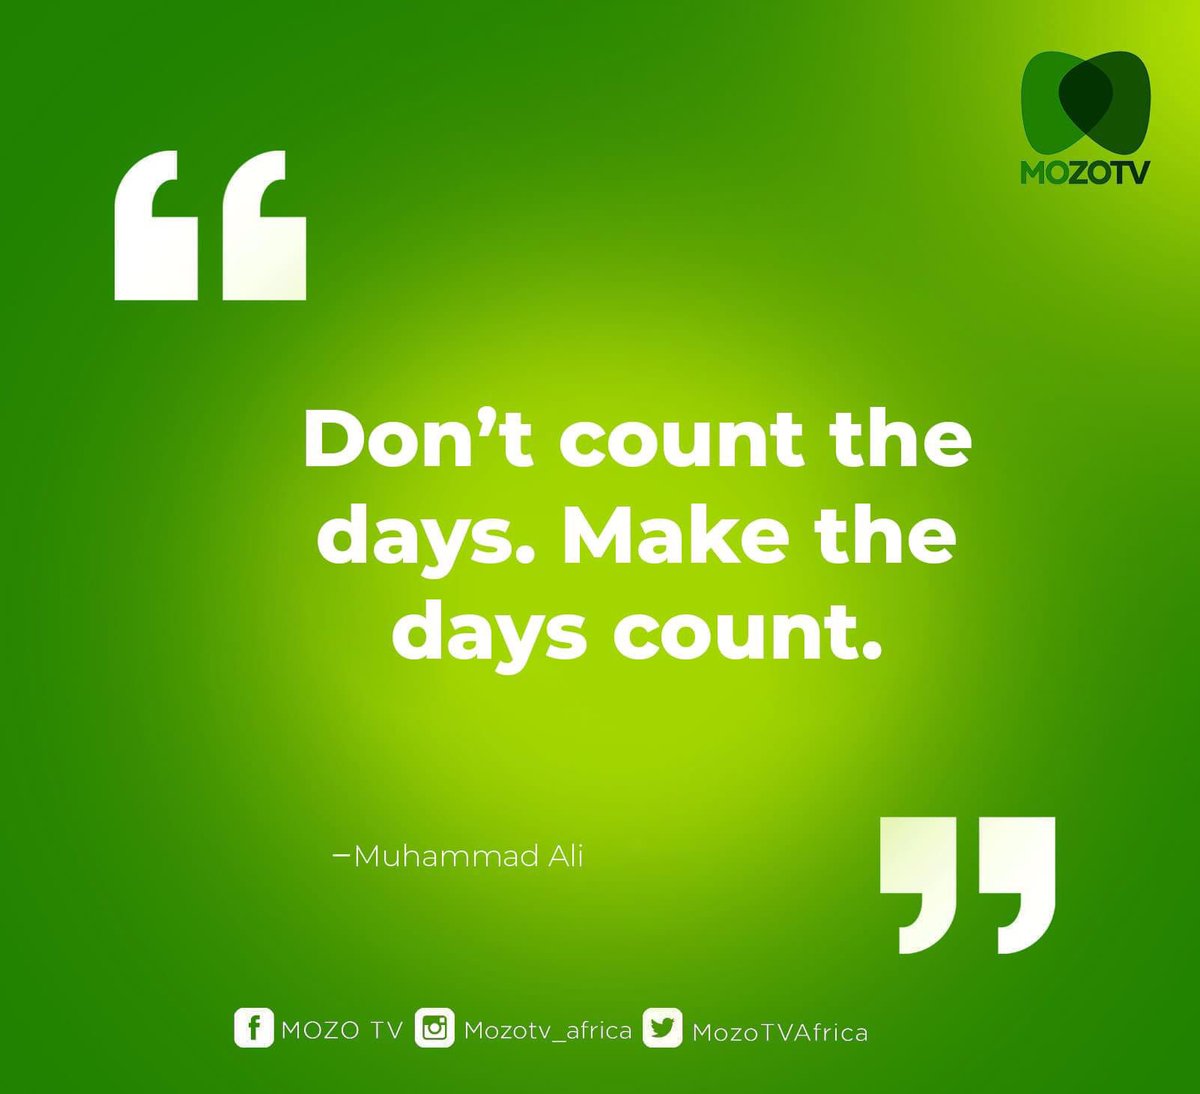 Let’s make the days count shall we?
Have a productive week💚.

Tune In Now! TopStar Channel 108 and 544 on DTH (Dish)💚
Also, install the Startimes APP via the link below 👇🏾:
play.google.com/store/apps/det…... 

#MozoTV #ARefreshingExperience #Productivity #NewWeek